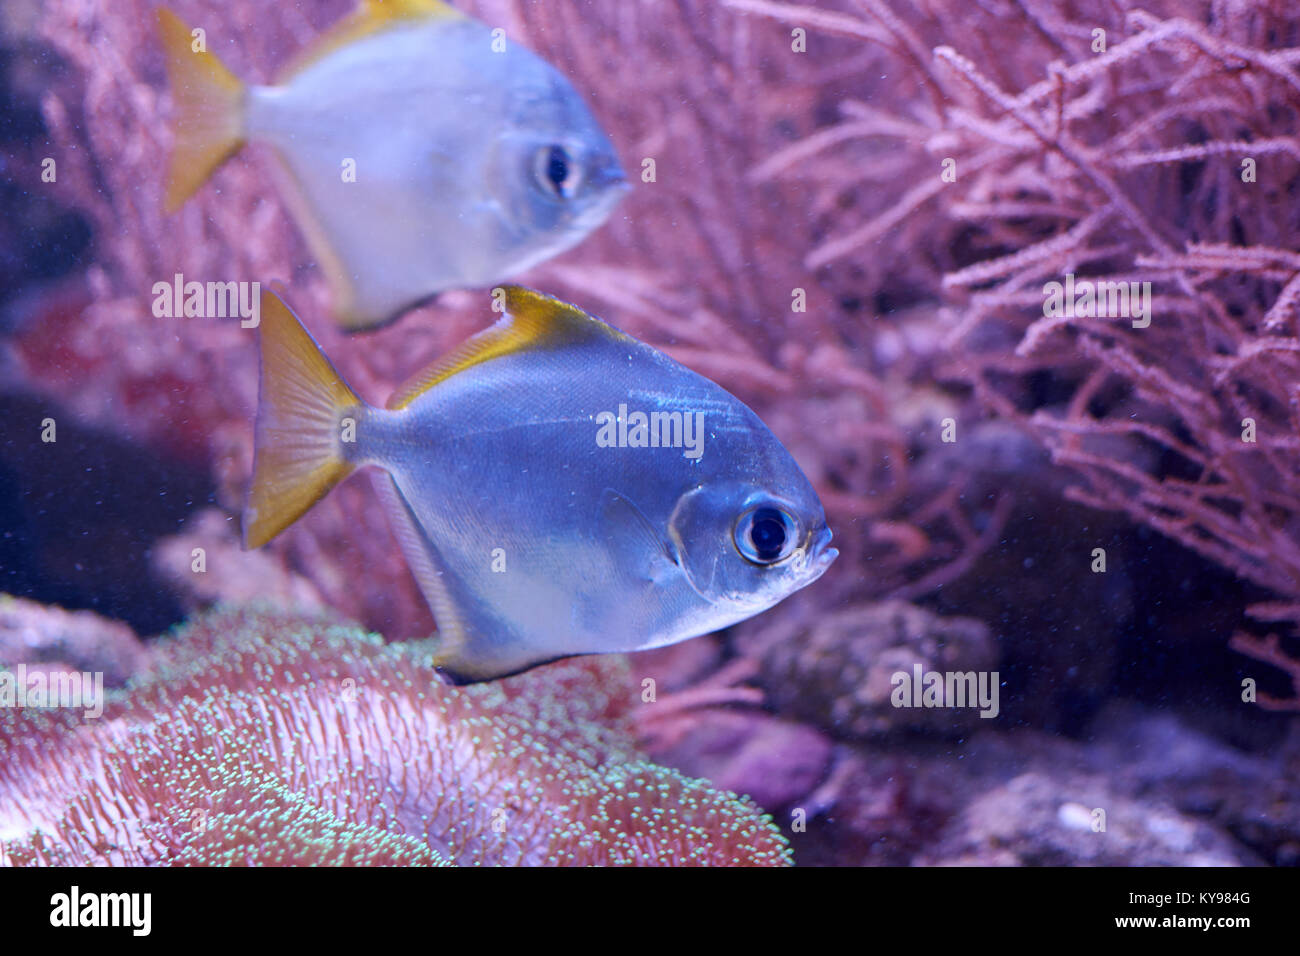 Monodactylus argentus or silver moonyfishes near a reef Stock Photo